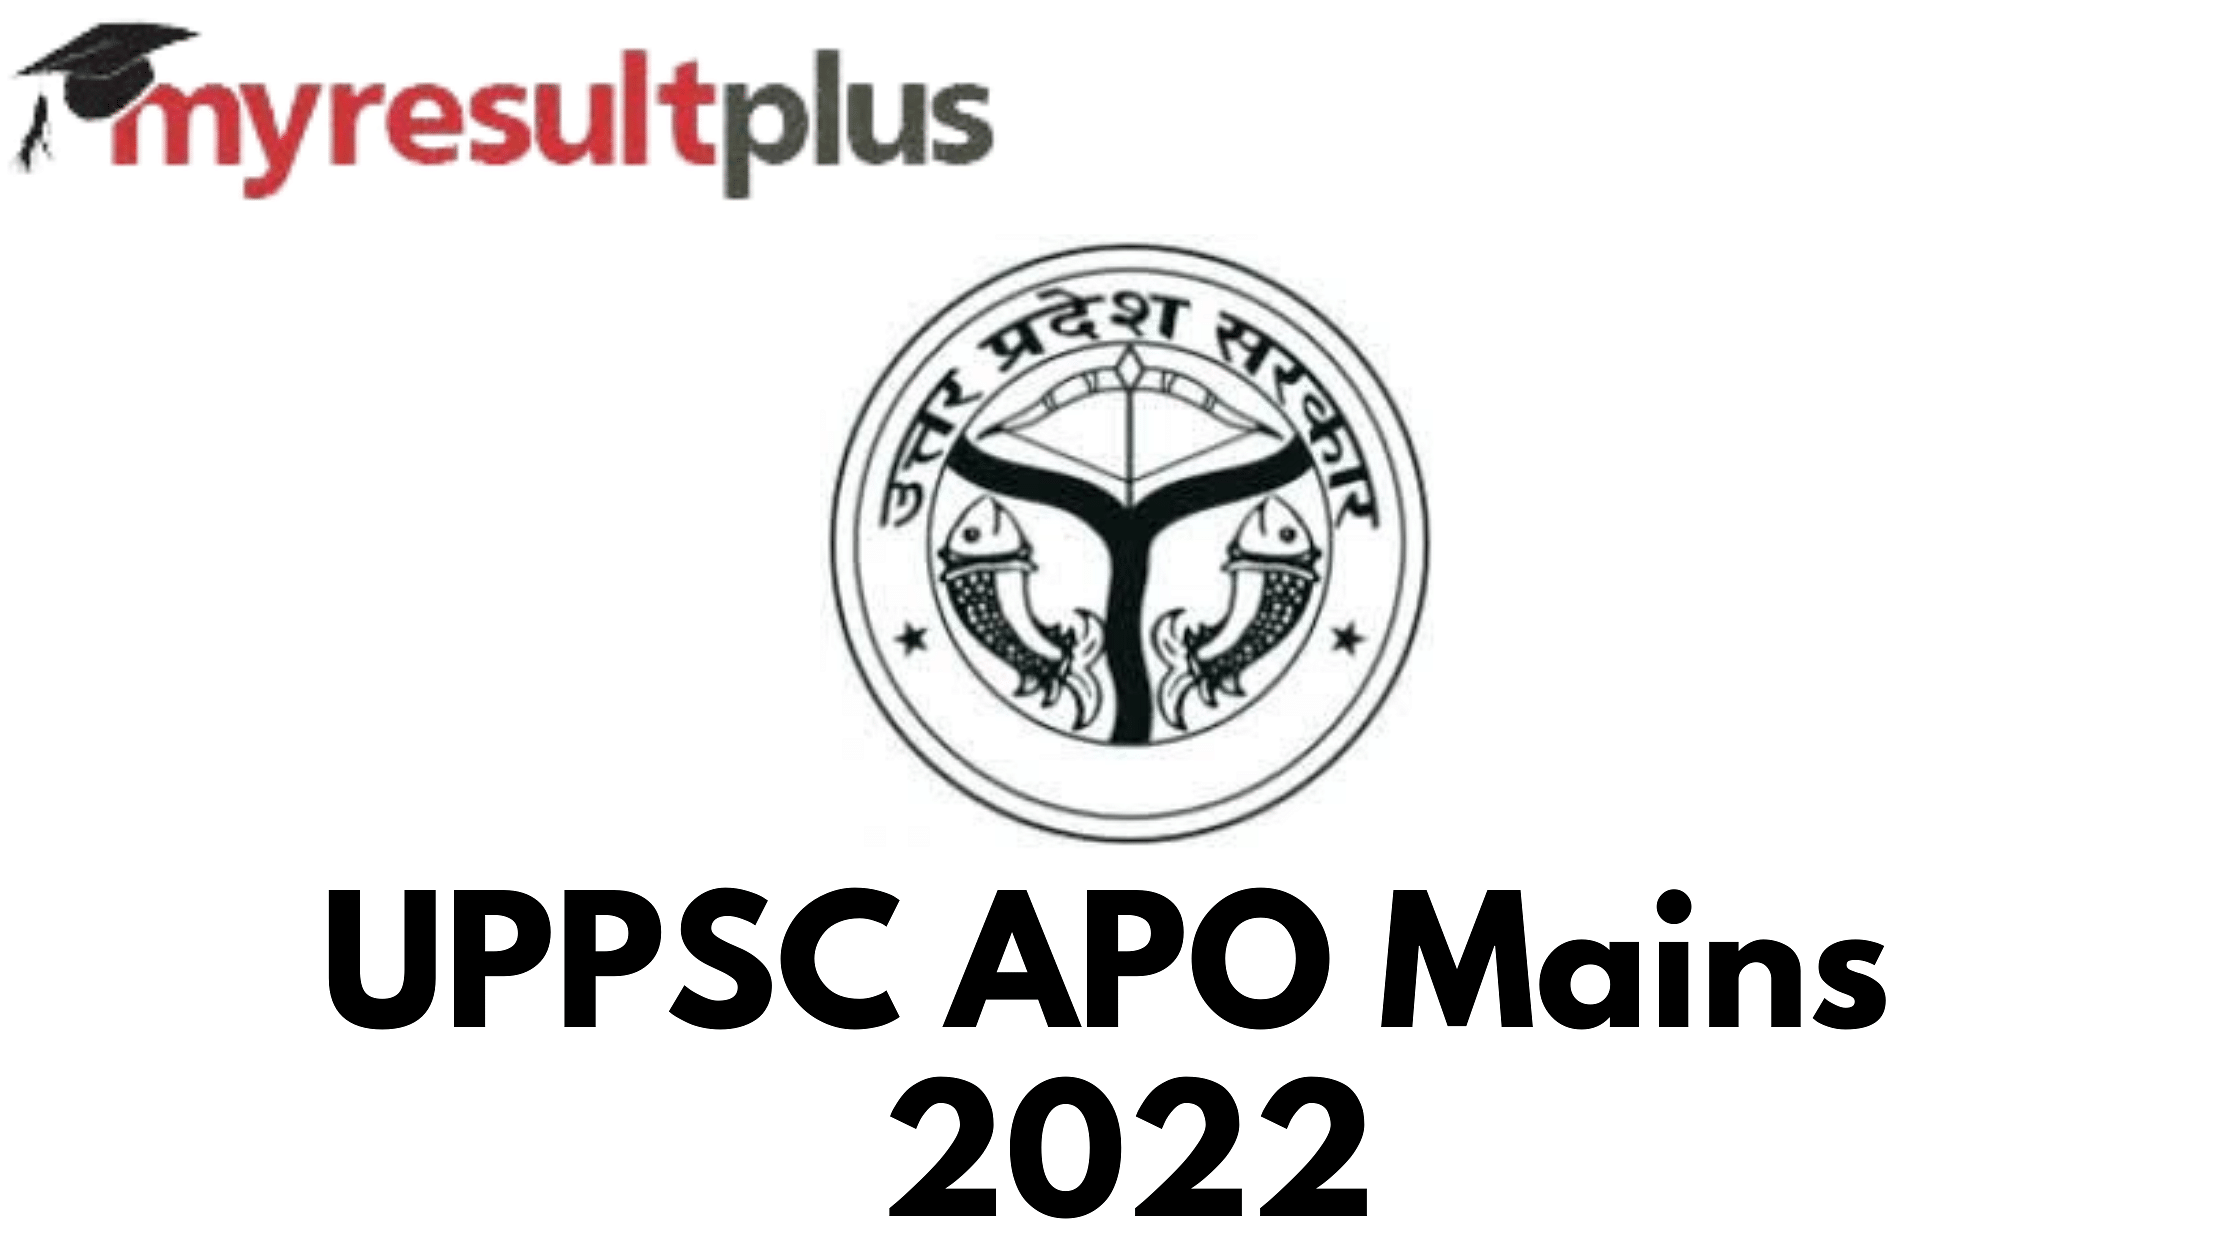 UPPSC APO Mains 2022 Registration Begins, Know How to Apply Here